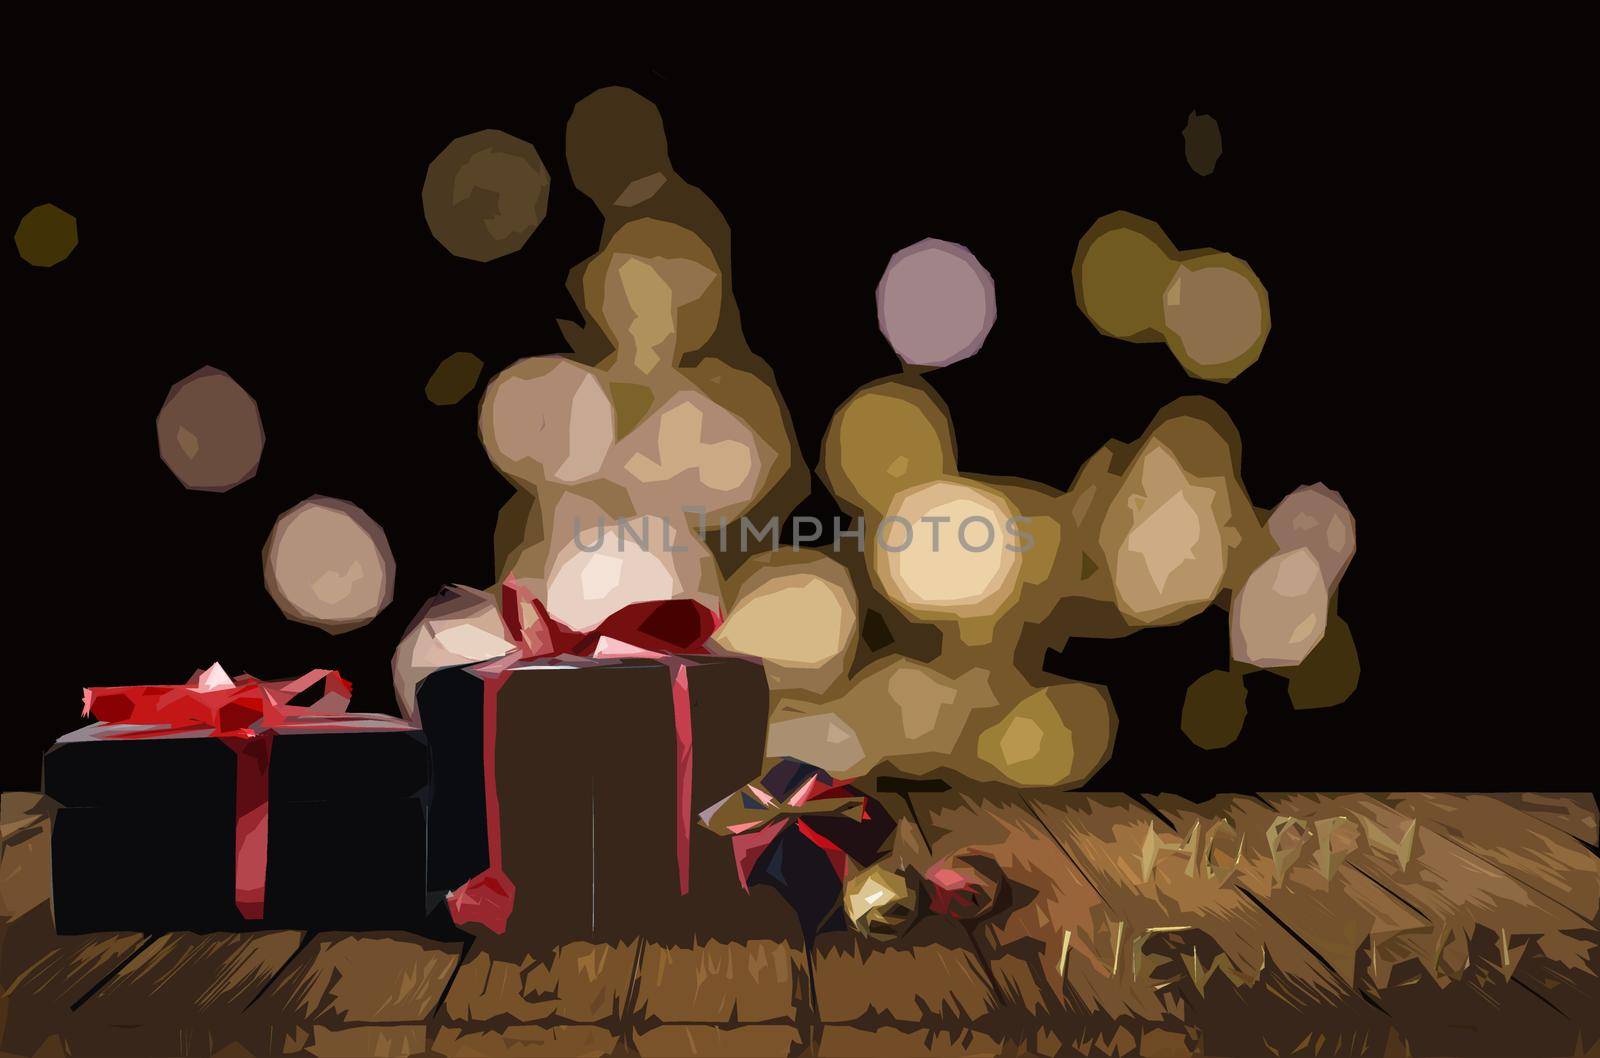 Christmas background with gifts. Xmas boxes with bows and place for text. Illustration. by Andelov13